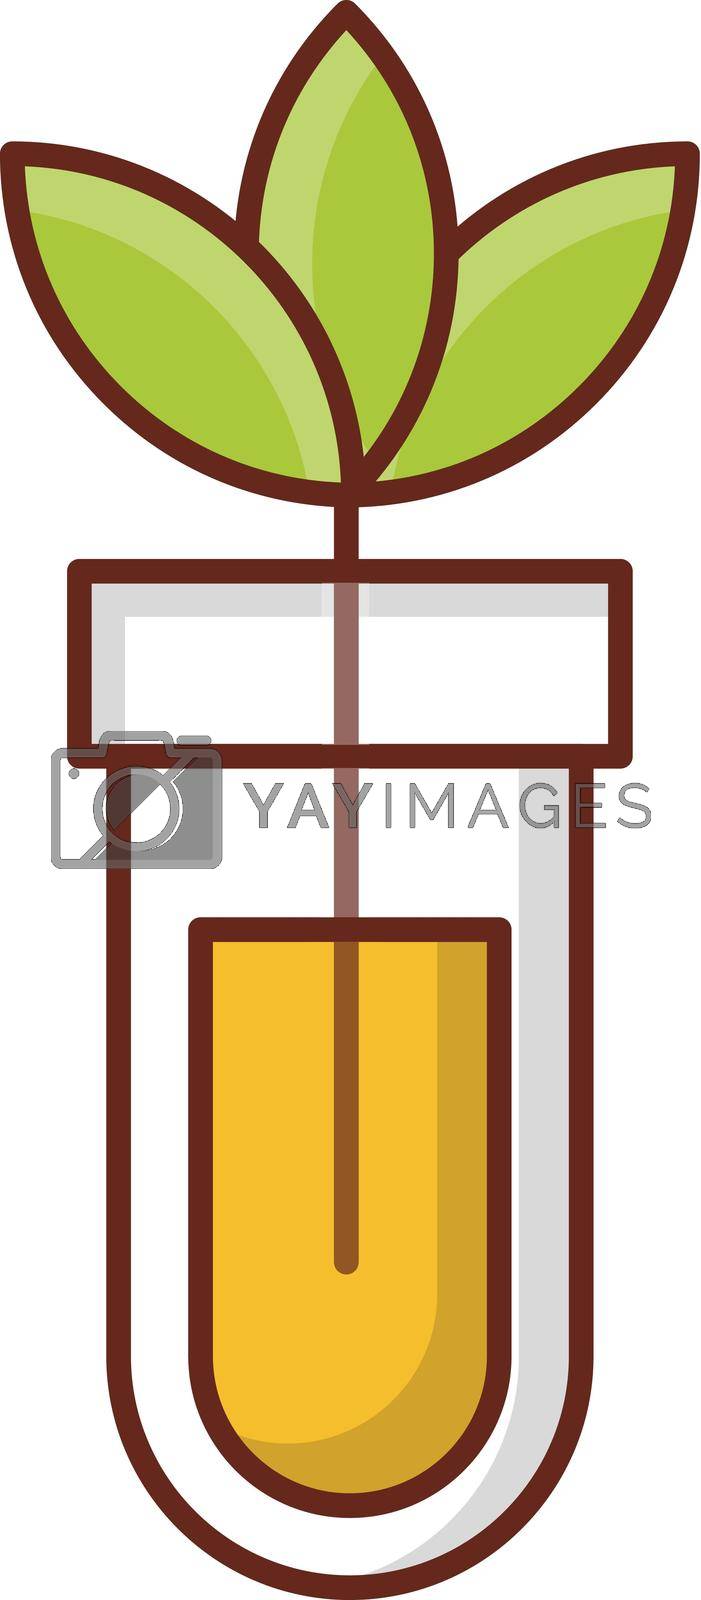 Royalty free image of experiment by FlaticonsDesign